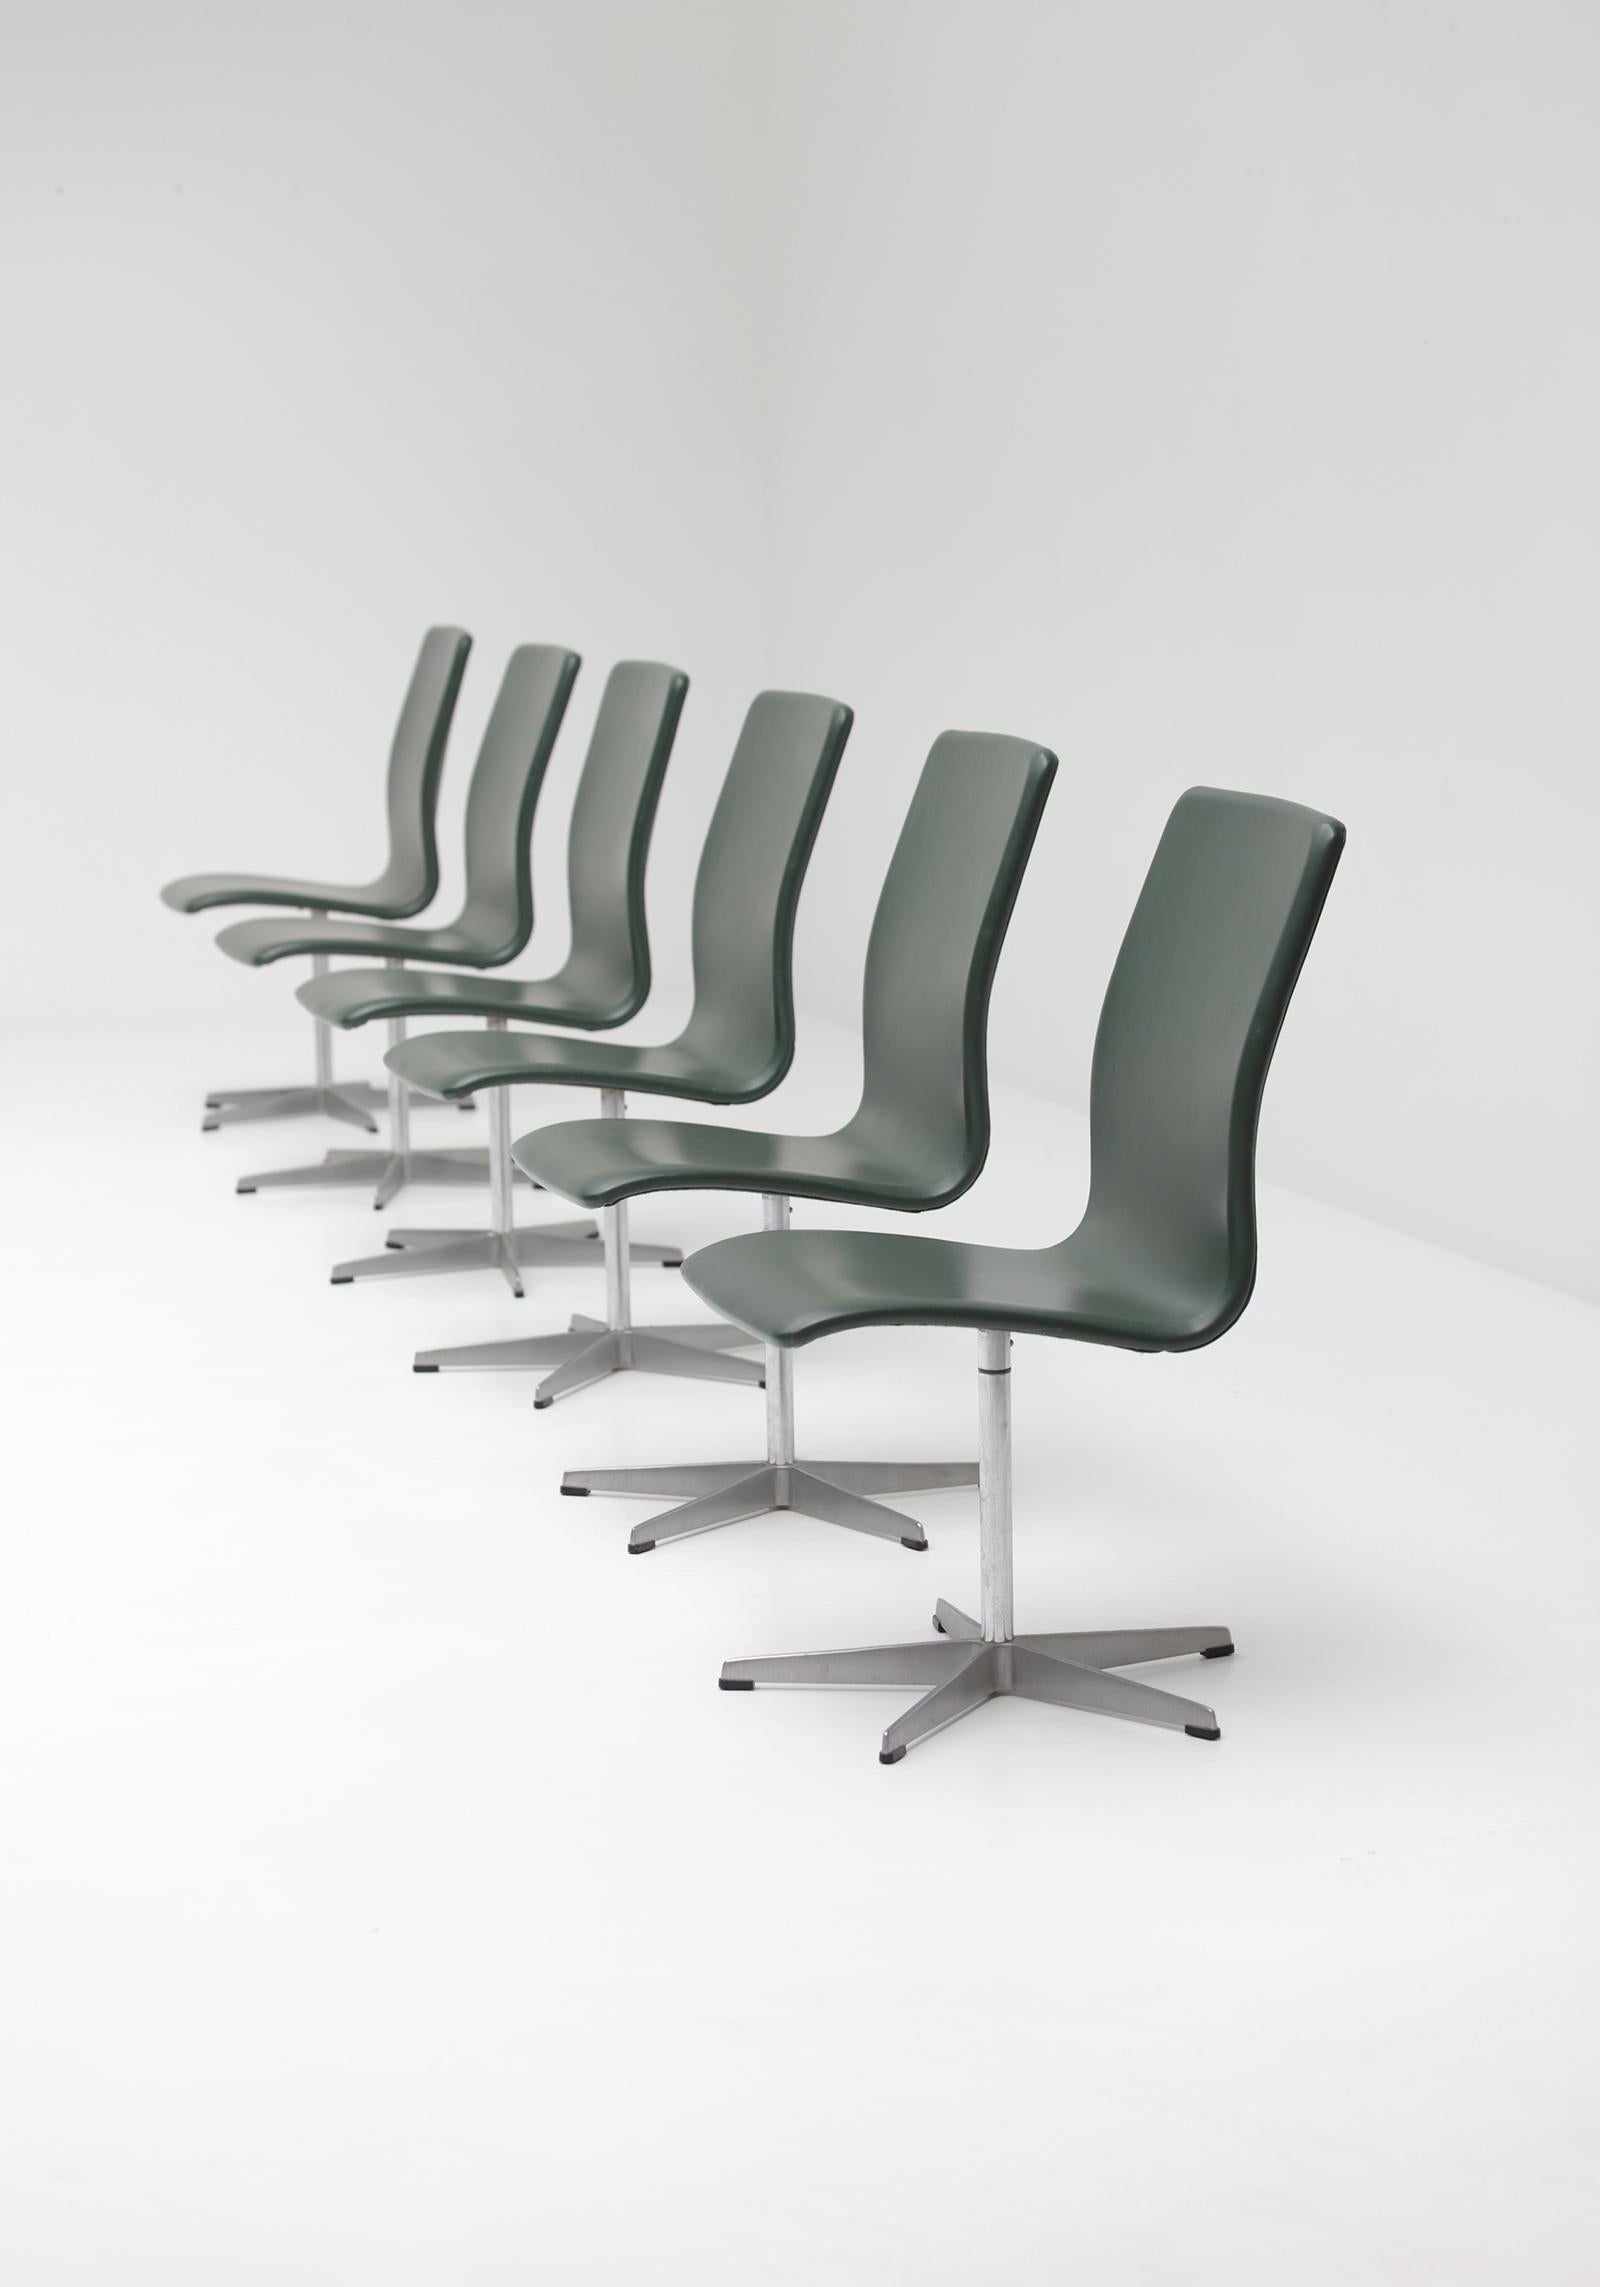 Set of 6 Arne Jacobsen Oxford dining or office swivel chairs for Fritz Hansen. The chairs come straight from the original owner who preserved these chairs very well. They have their original moss green leather upholstery. The chrome has a normal